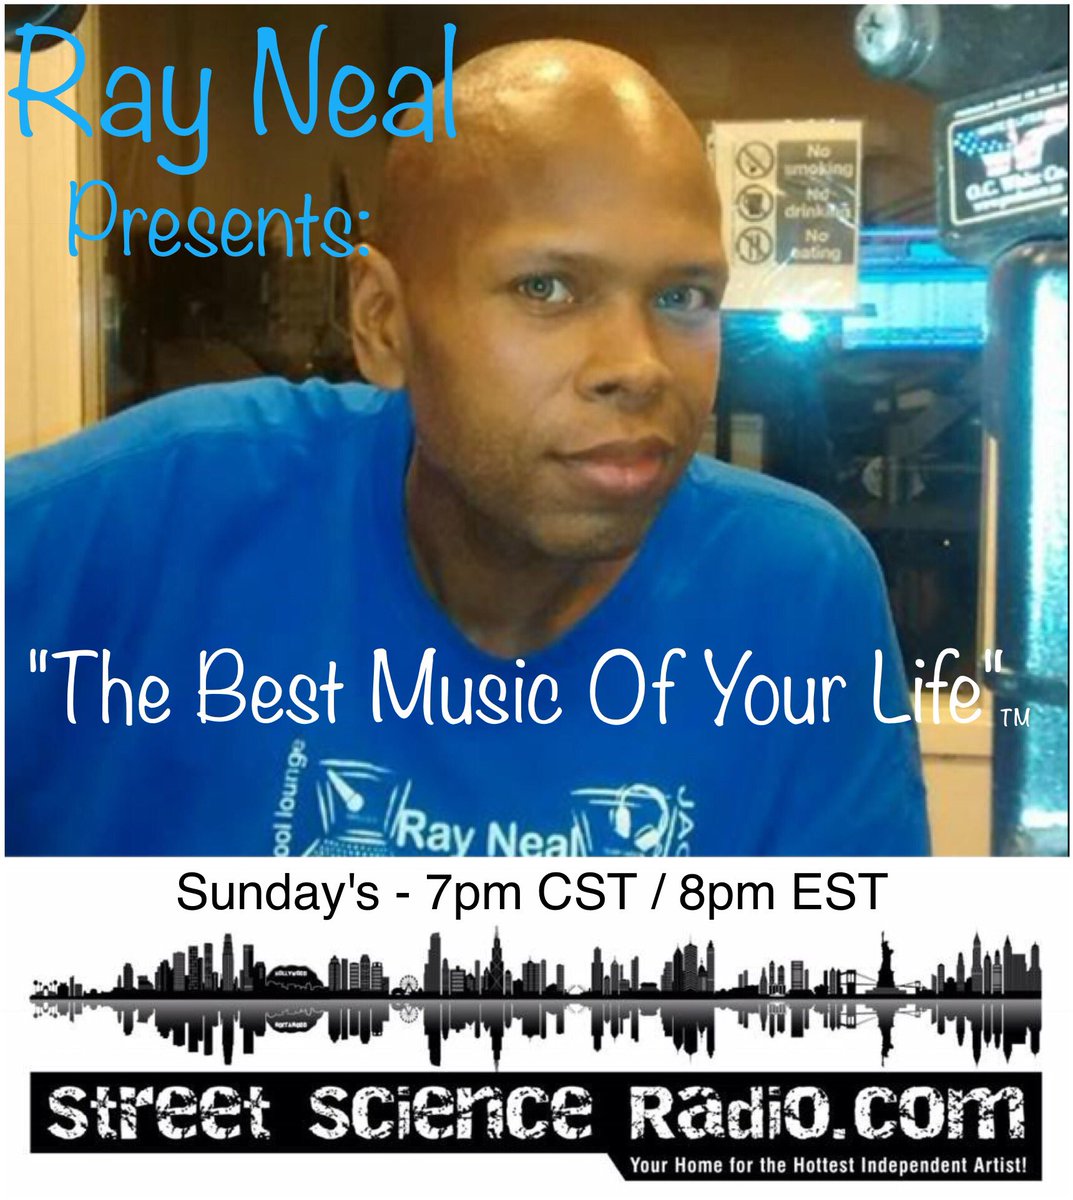 🚨🚨🚨🚨
The hottest #OldSchool DJ on radio, #RayNeal brings you “The Best #Music Of Your Life”

#Tonight music from #dianaross, #marvingaye, #shalamar, #delphonics , #tsmonk, #garysgang, AND MORE...

Tonight and every #Sunday, 8pm EST / 7pm CST - on StreetScienceRadio.com!